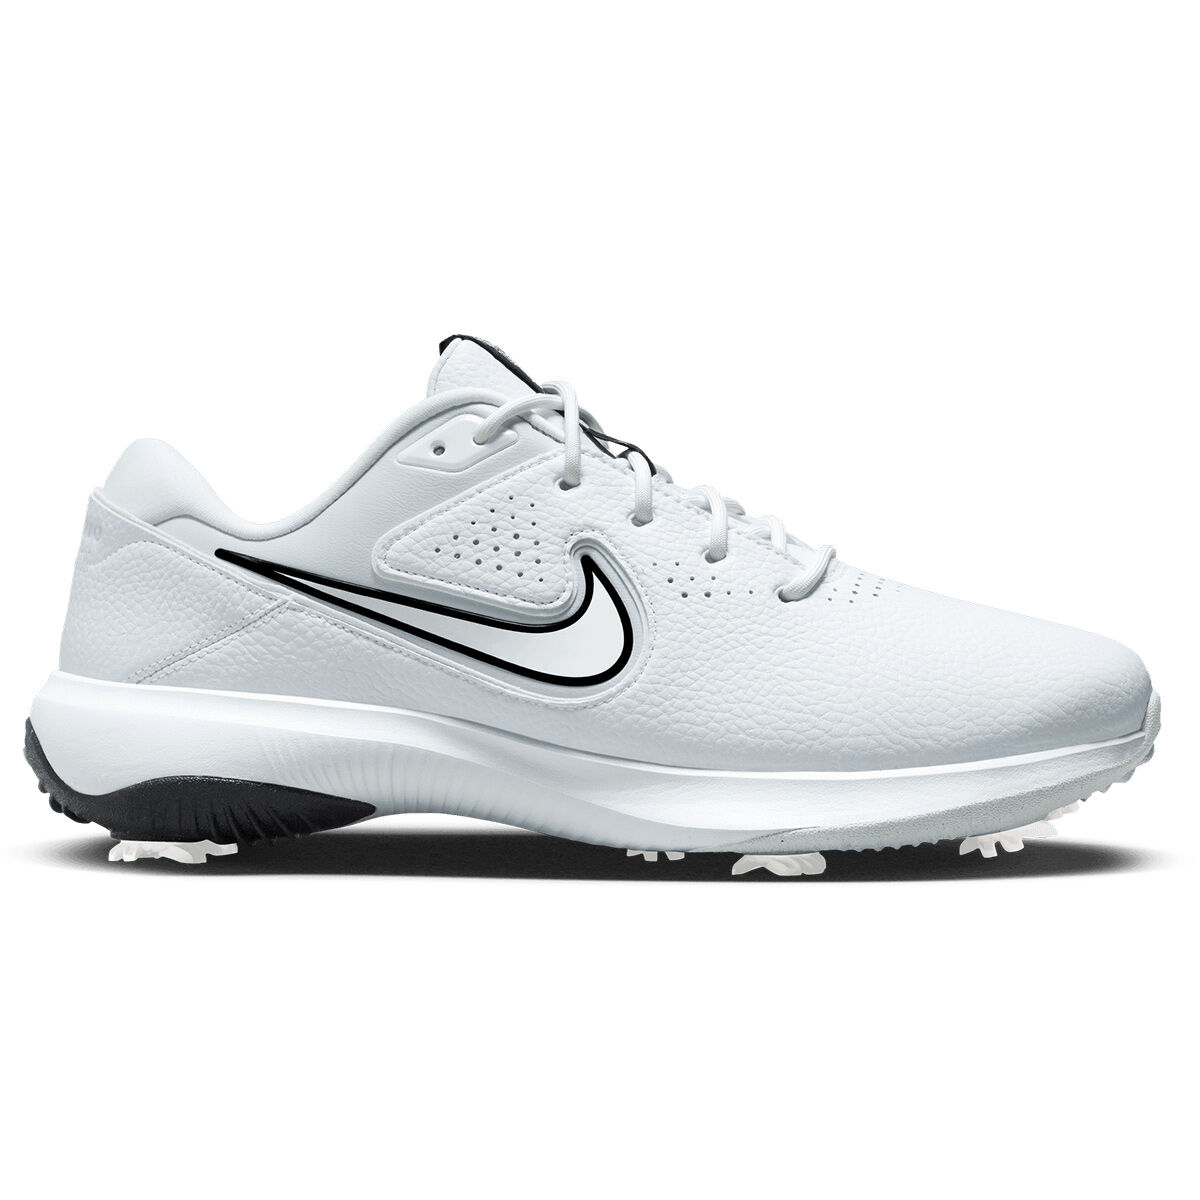 Nike Men’s Victory Pro 3 Waterproof Spiked Golf Shoes, Mens, White/black/pure platinum, 7 | American Golf